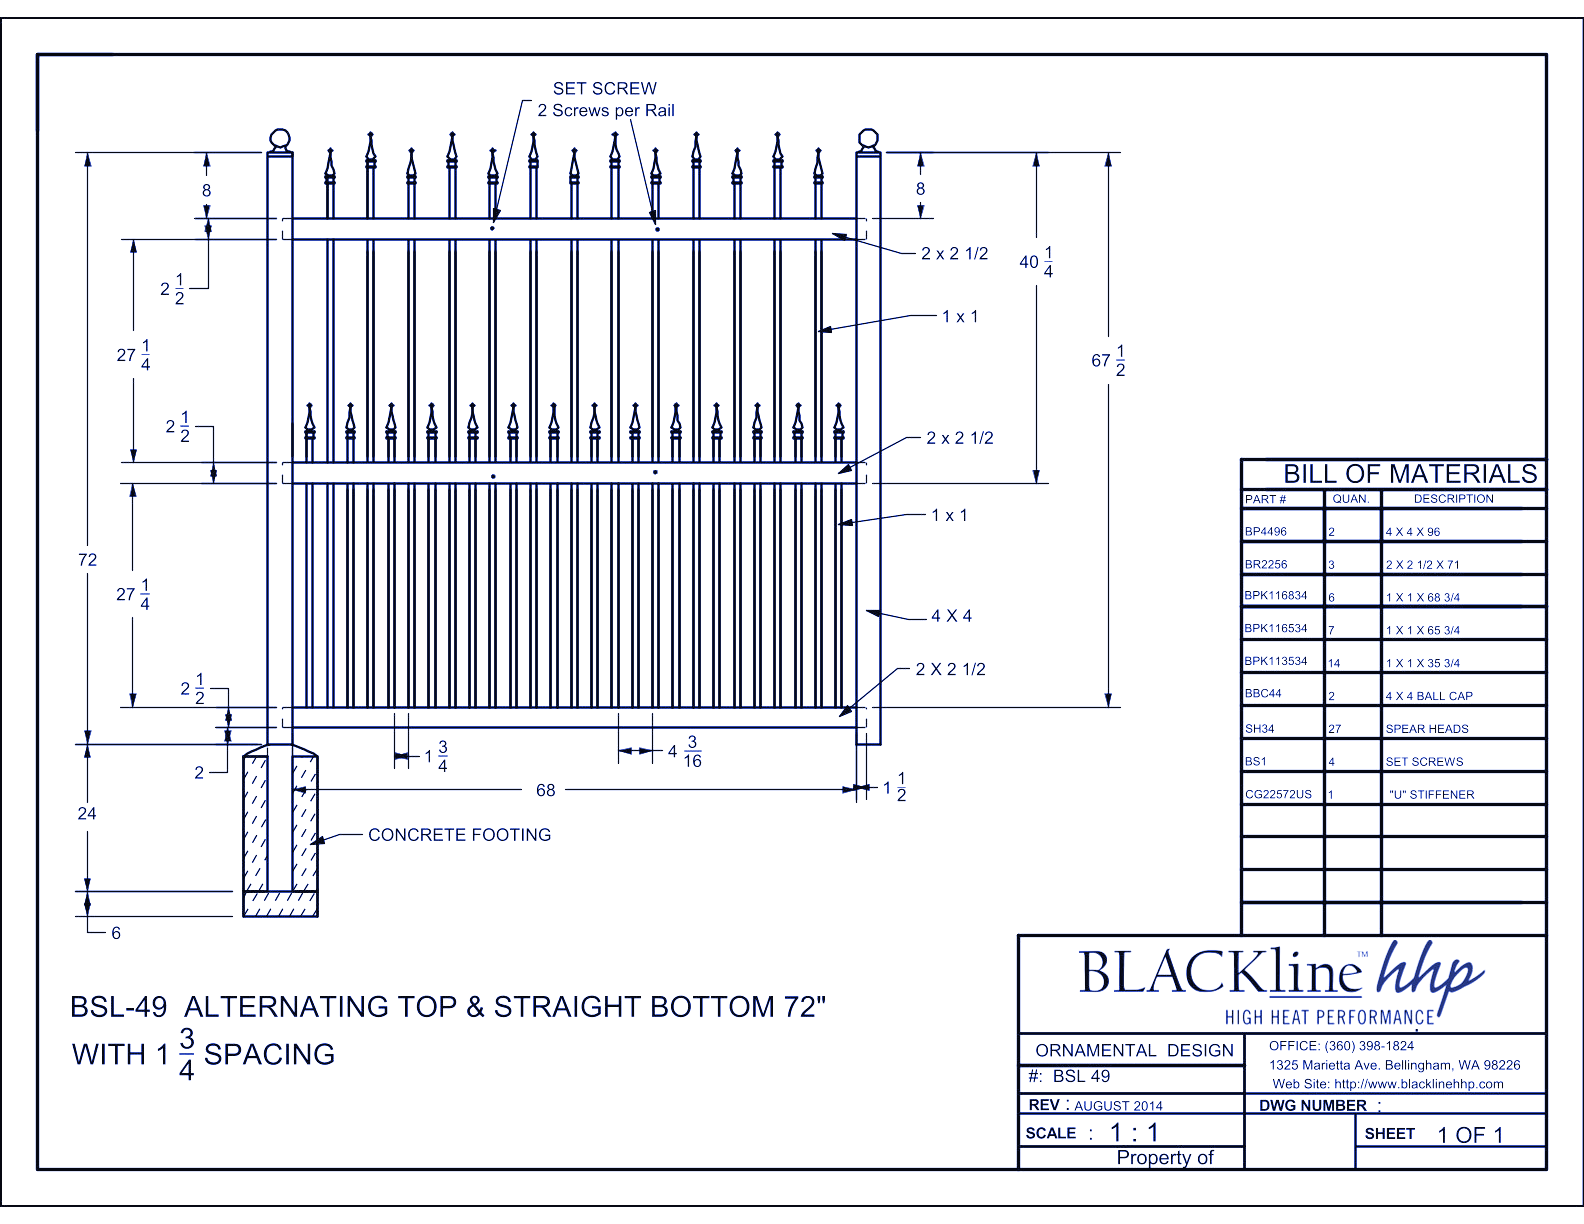 BSL-49: Alternating Top & Straight Bottom 72" with 1 3/4" Spacing